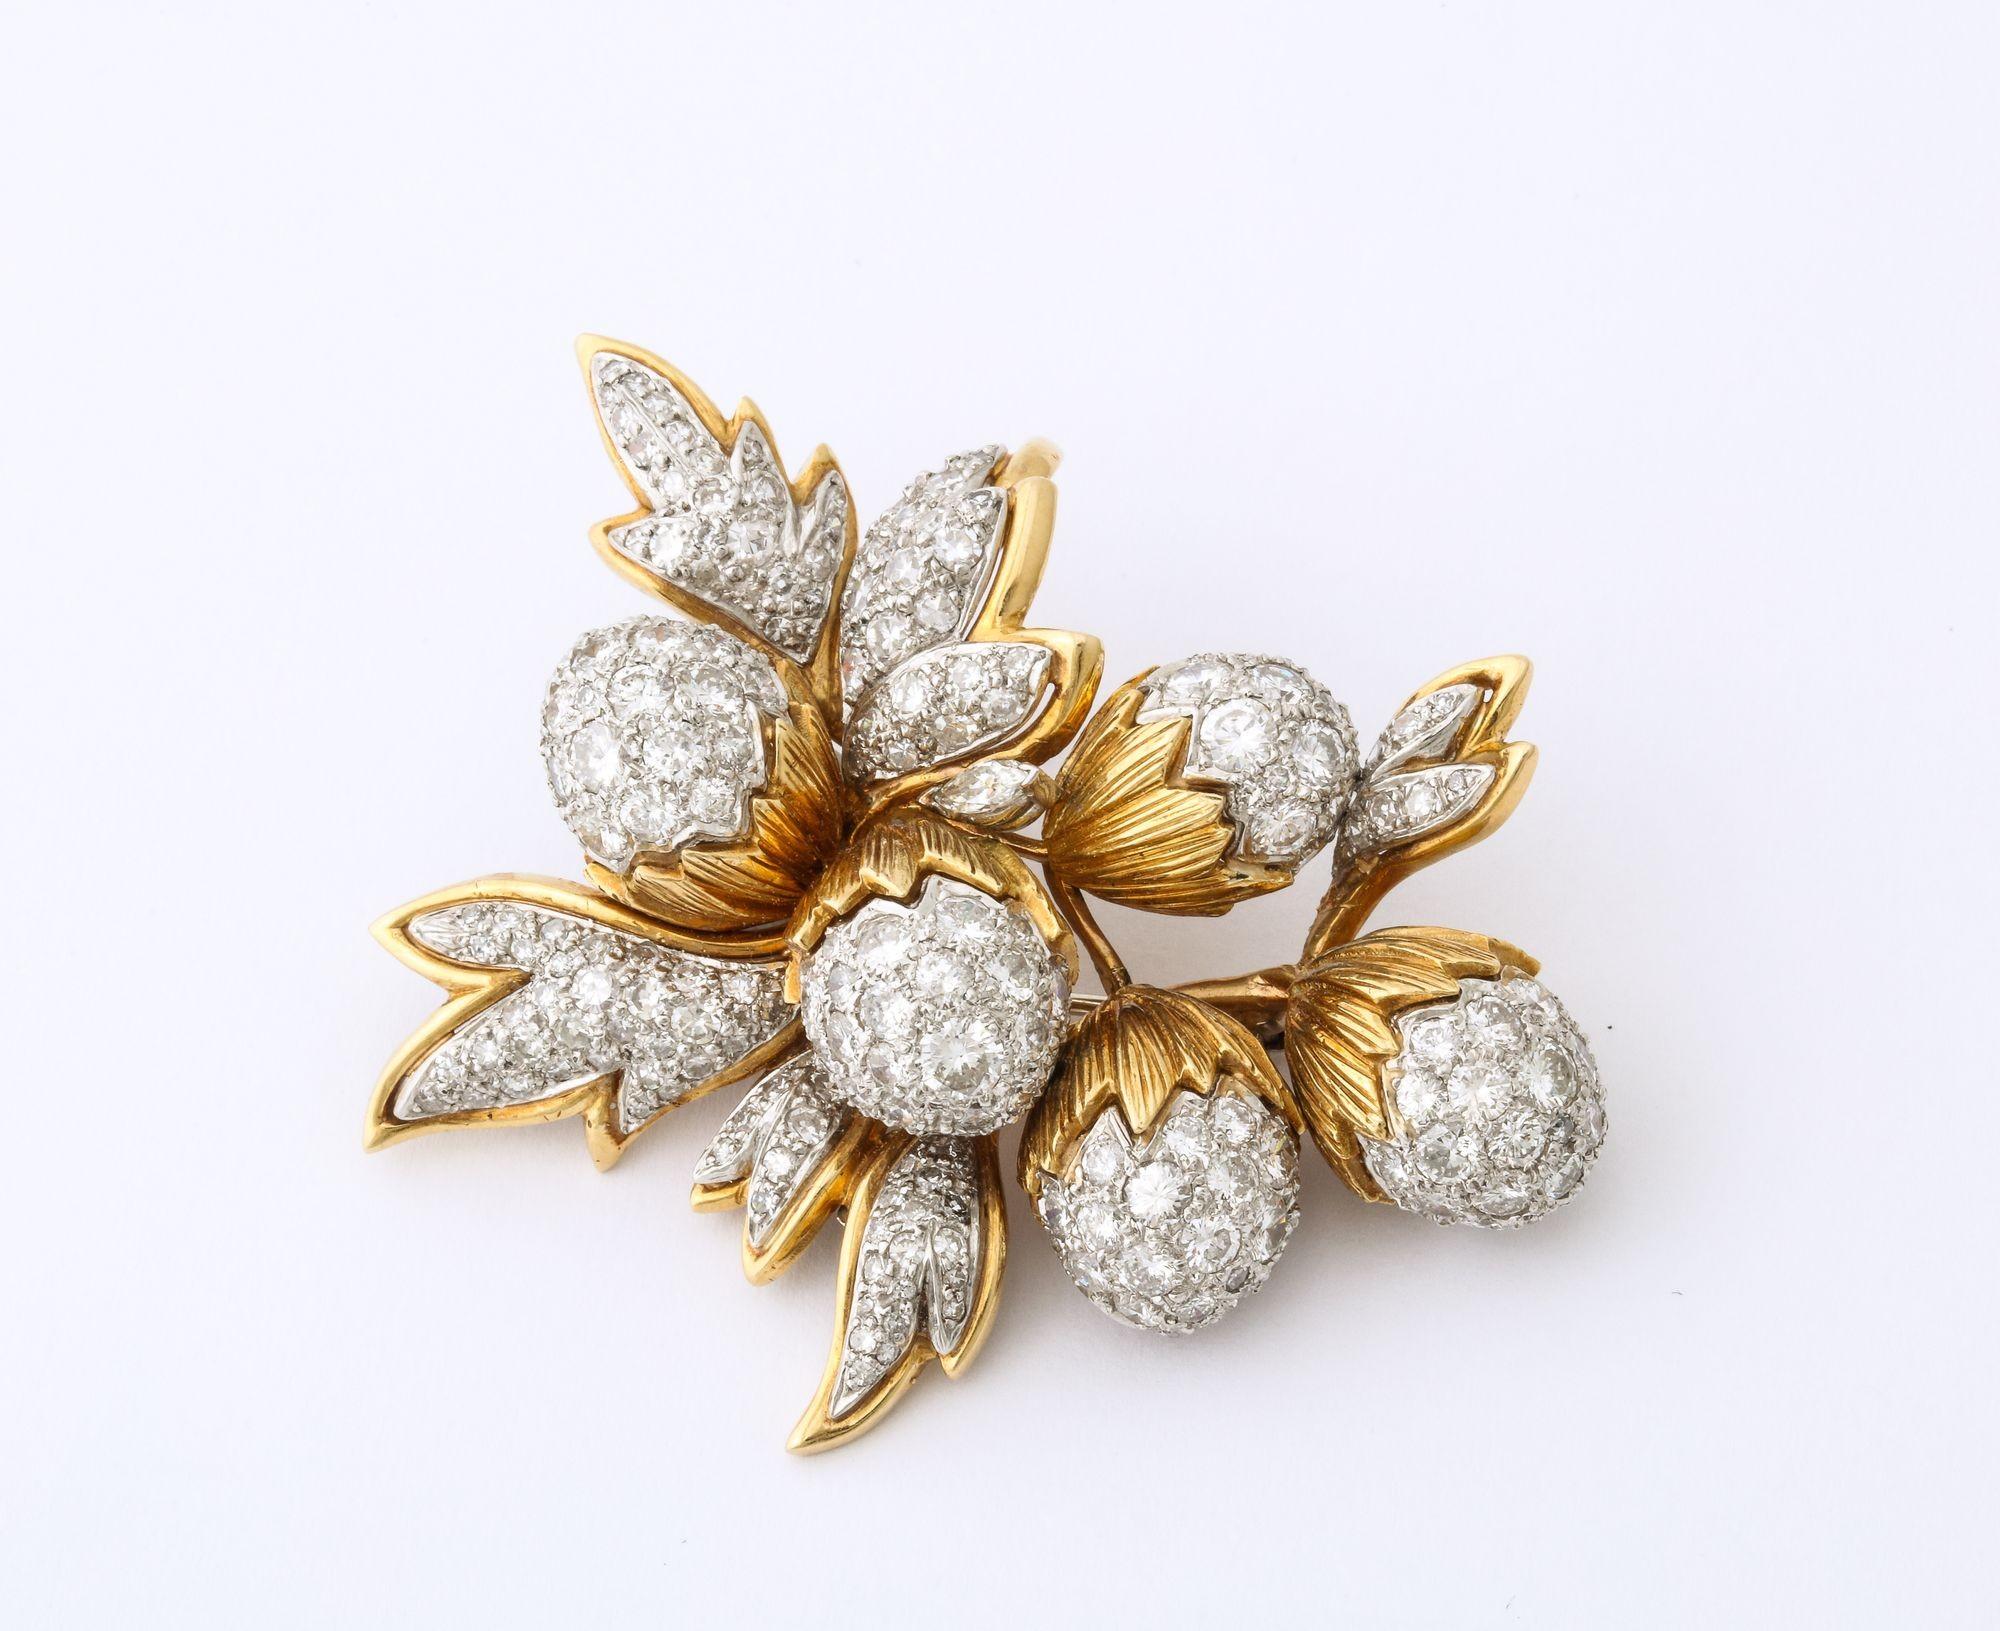 Old European Cut 18K Gold and Platinum Brooch with Diamond Acorns and Leaves